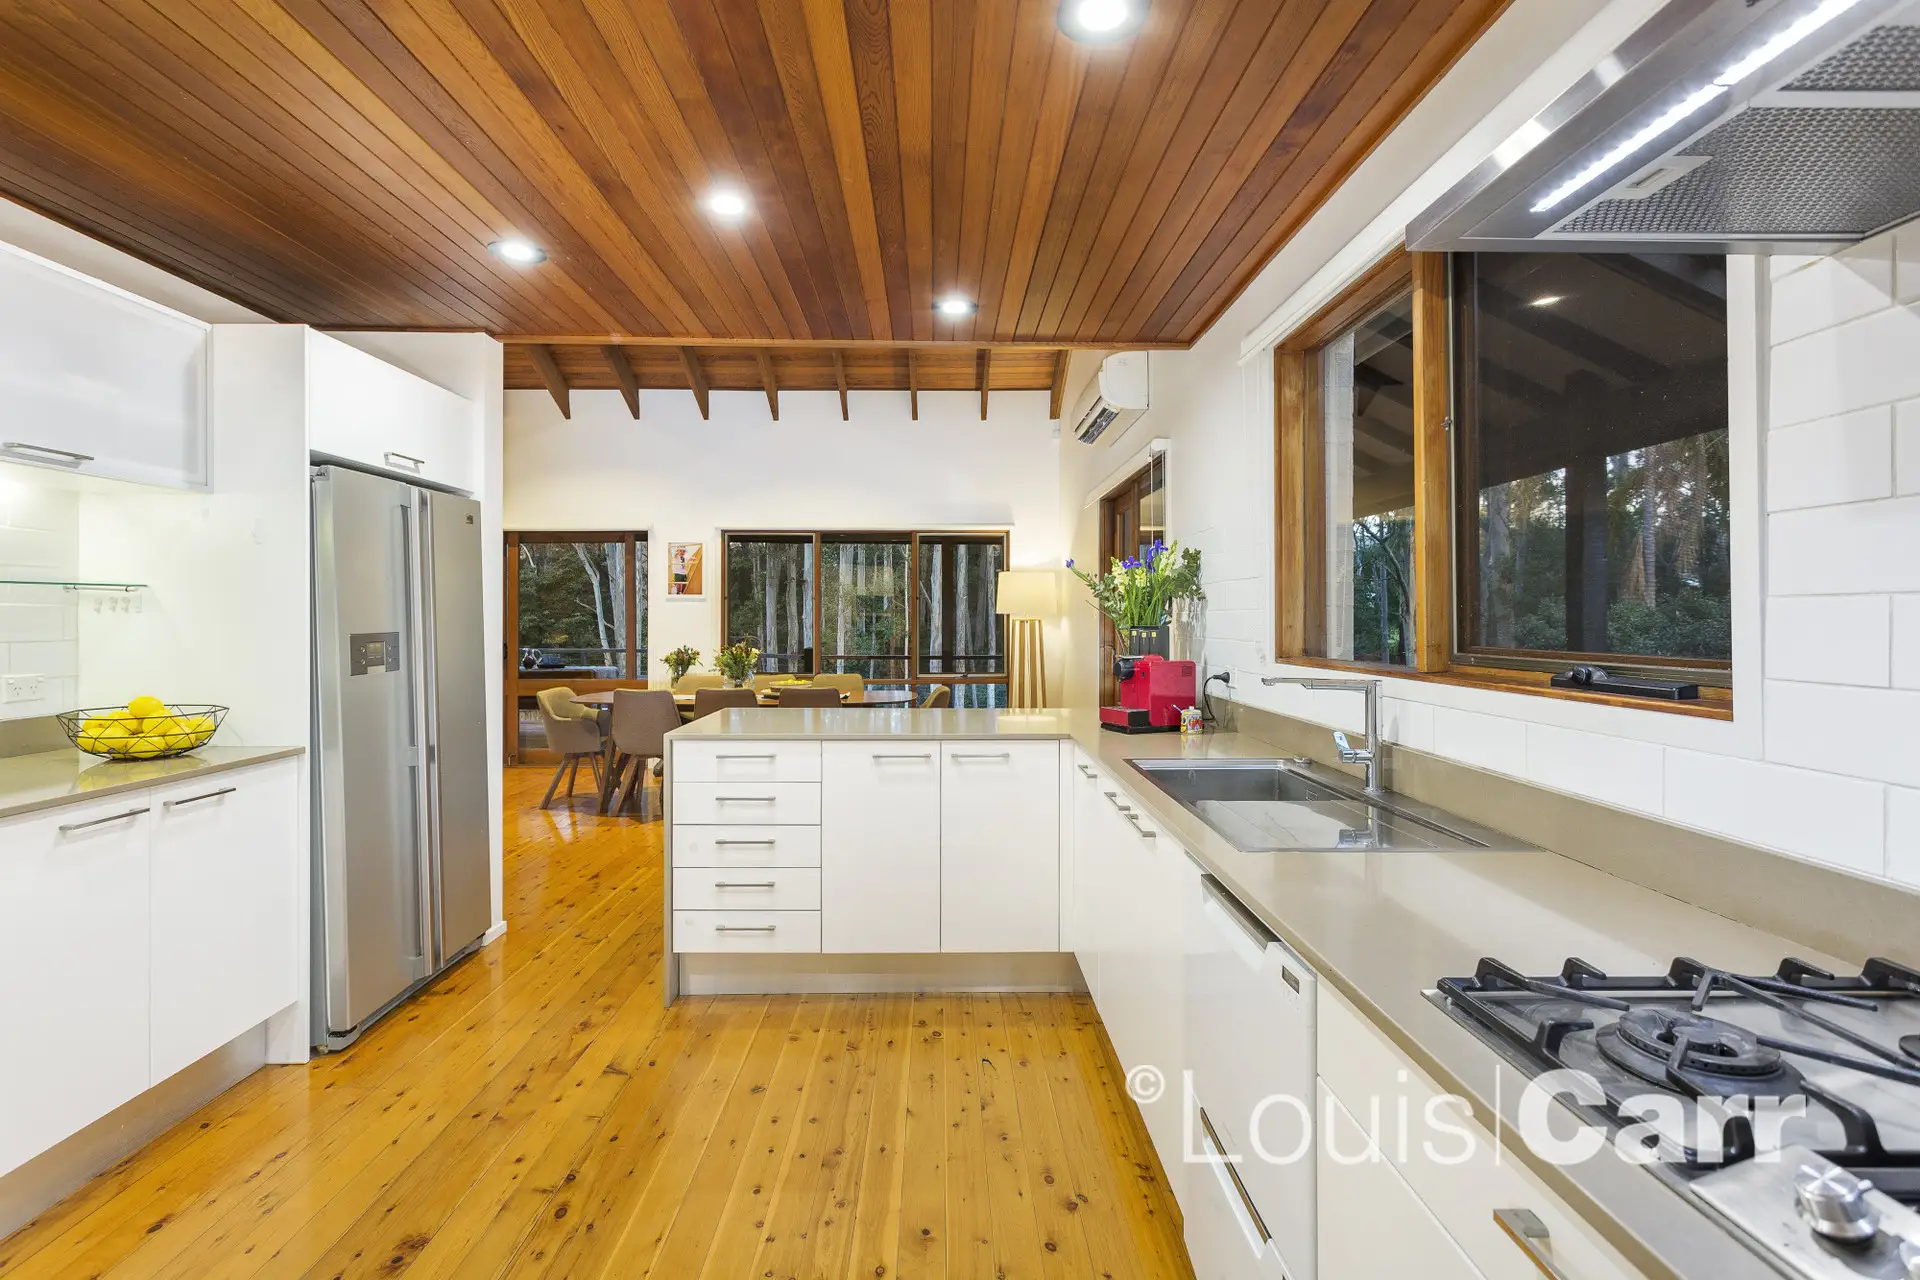 Photo #5: 98 Oratava Avenue, West Pennant Hills - Sold by Louis Carr Real Estate